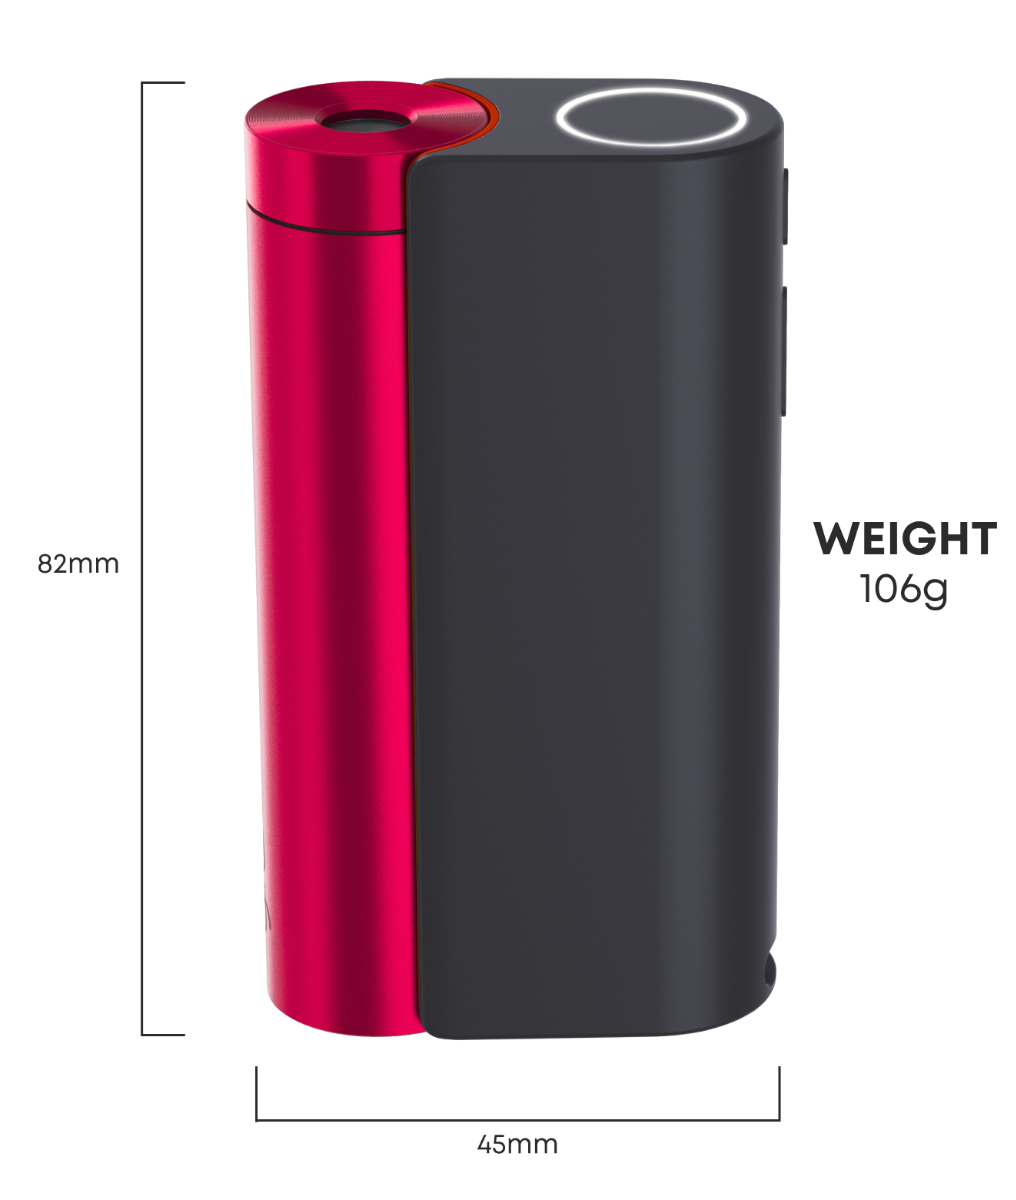 Weight and size of a glo™ HYPER X2 Tobacco Heater device